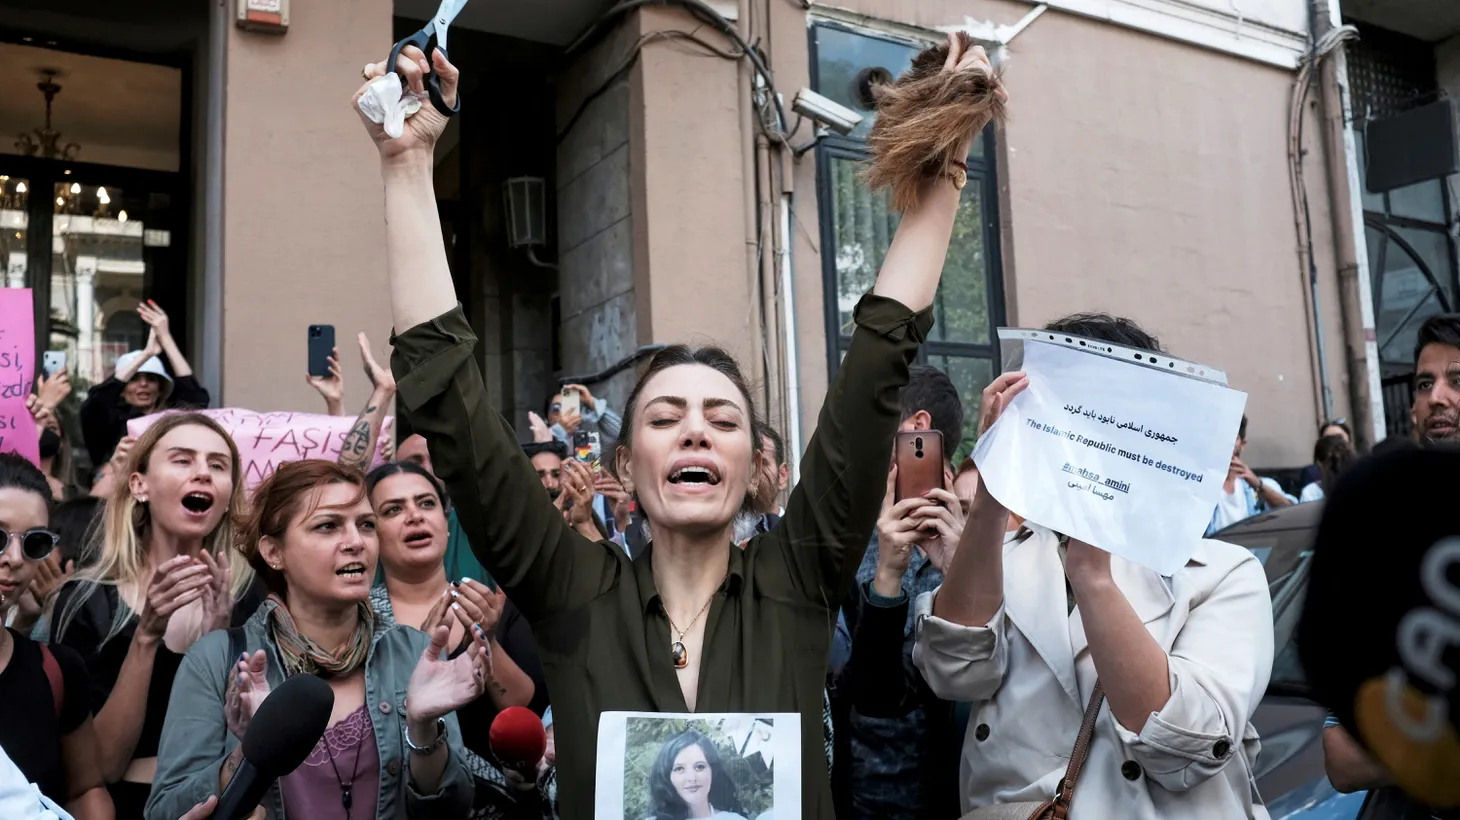 Nasibe Samsaei, an Iranian woman living in Turkey, reacts after she cut her hair during a protest following the death of Mahsa Amini, outside the Iranian consulate in Istanbul, Turkey September 21, 2022.